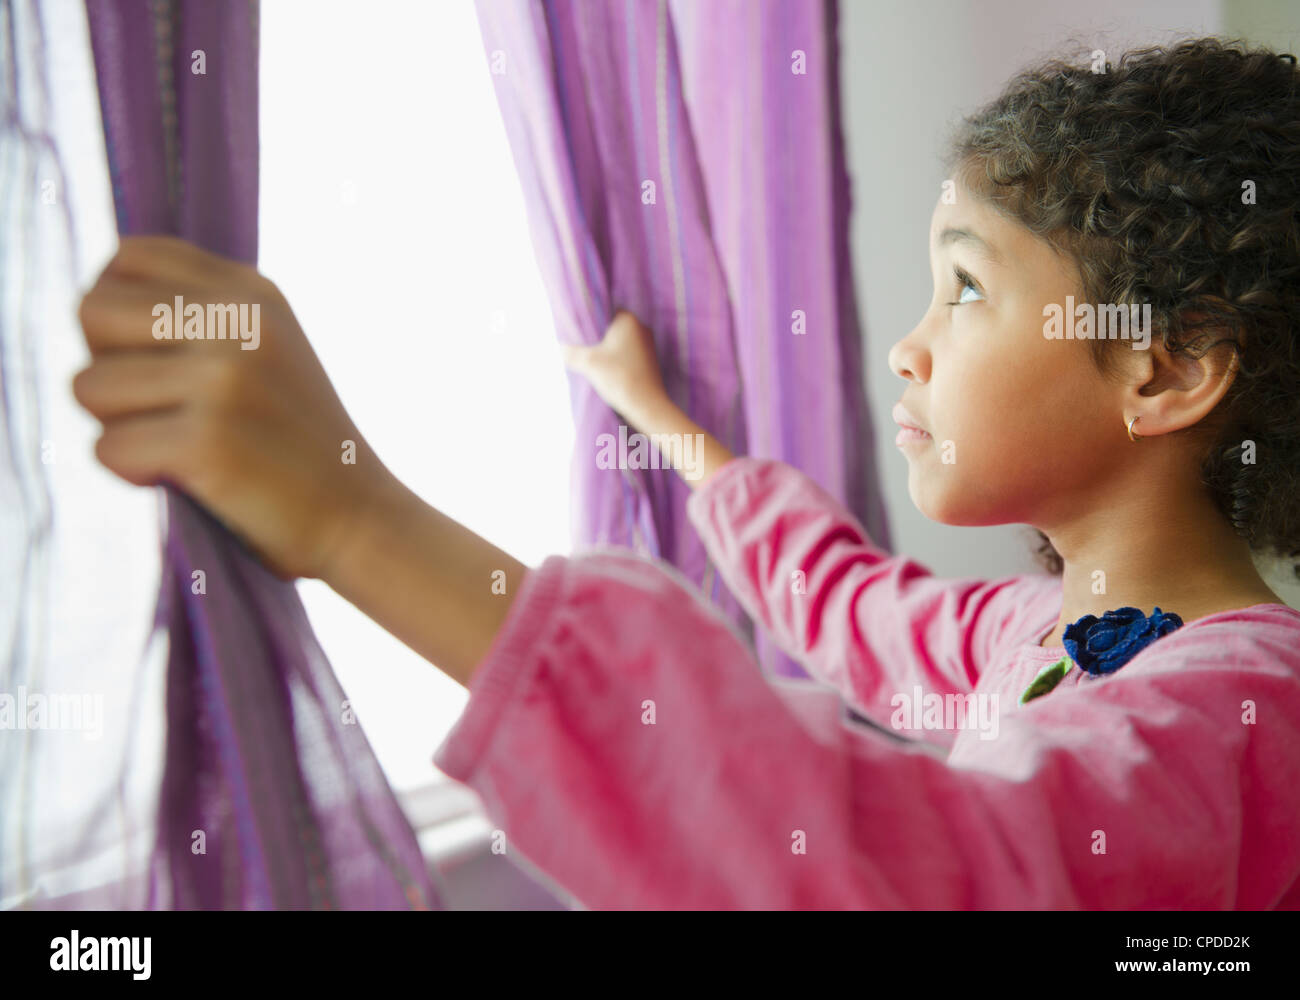 Mixed Race girl opening curtains Banque D'Images